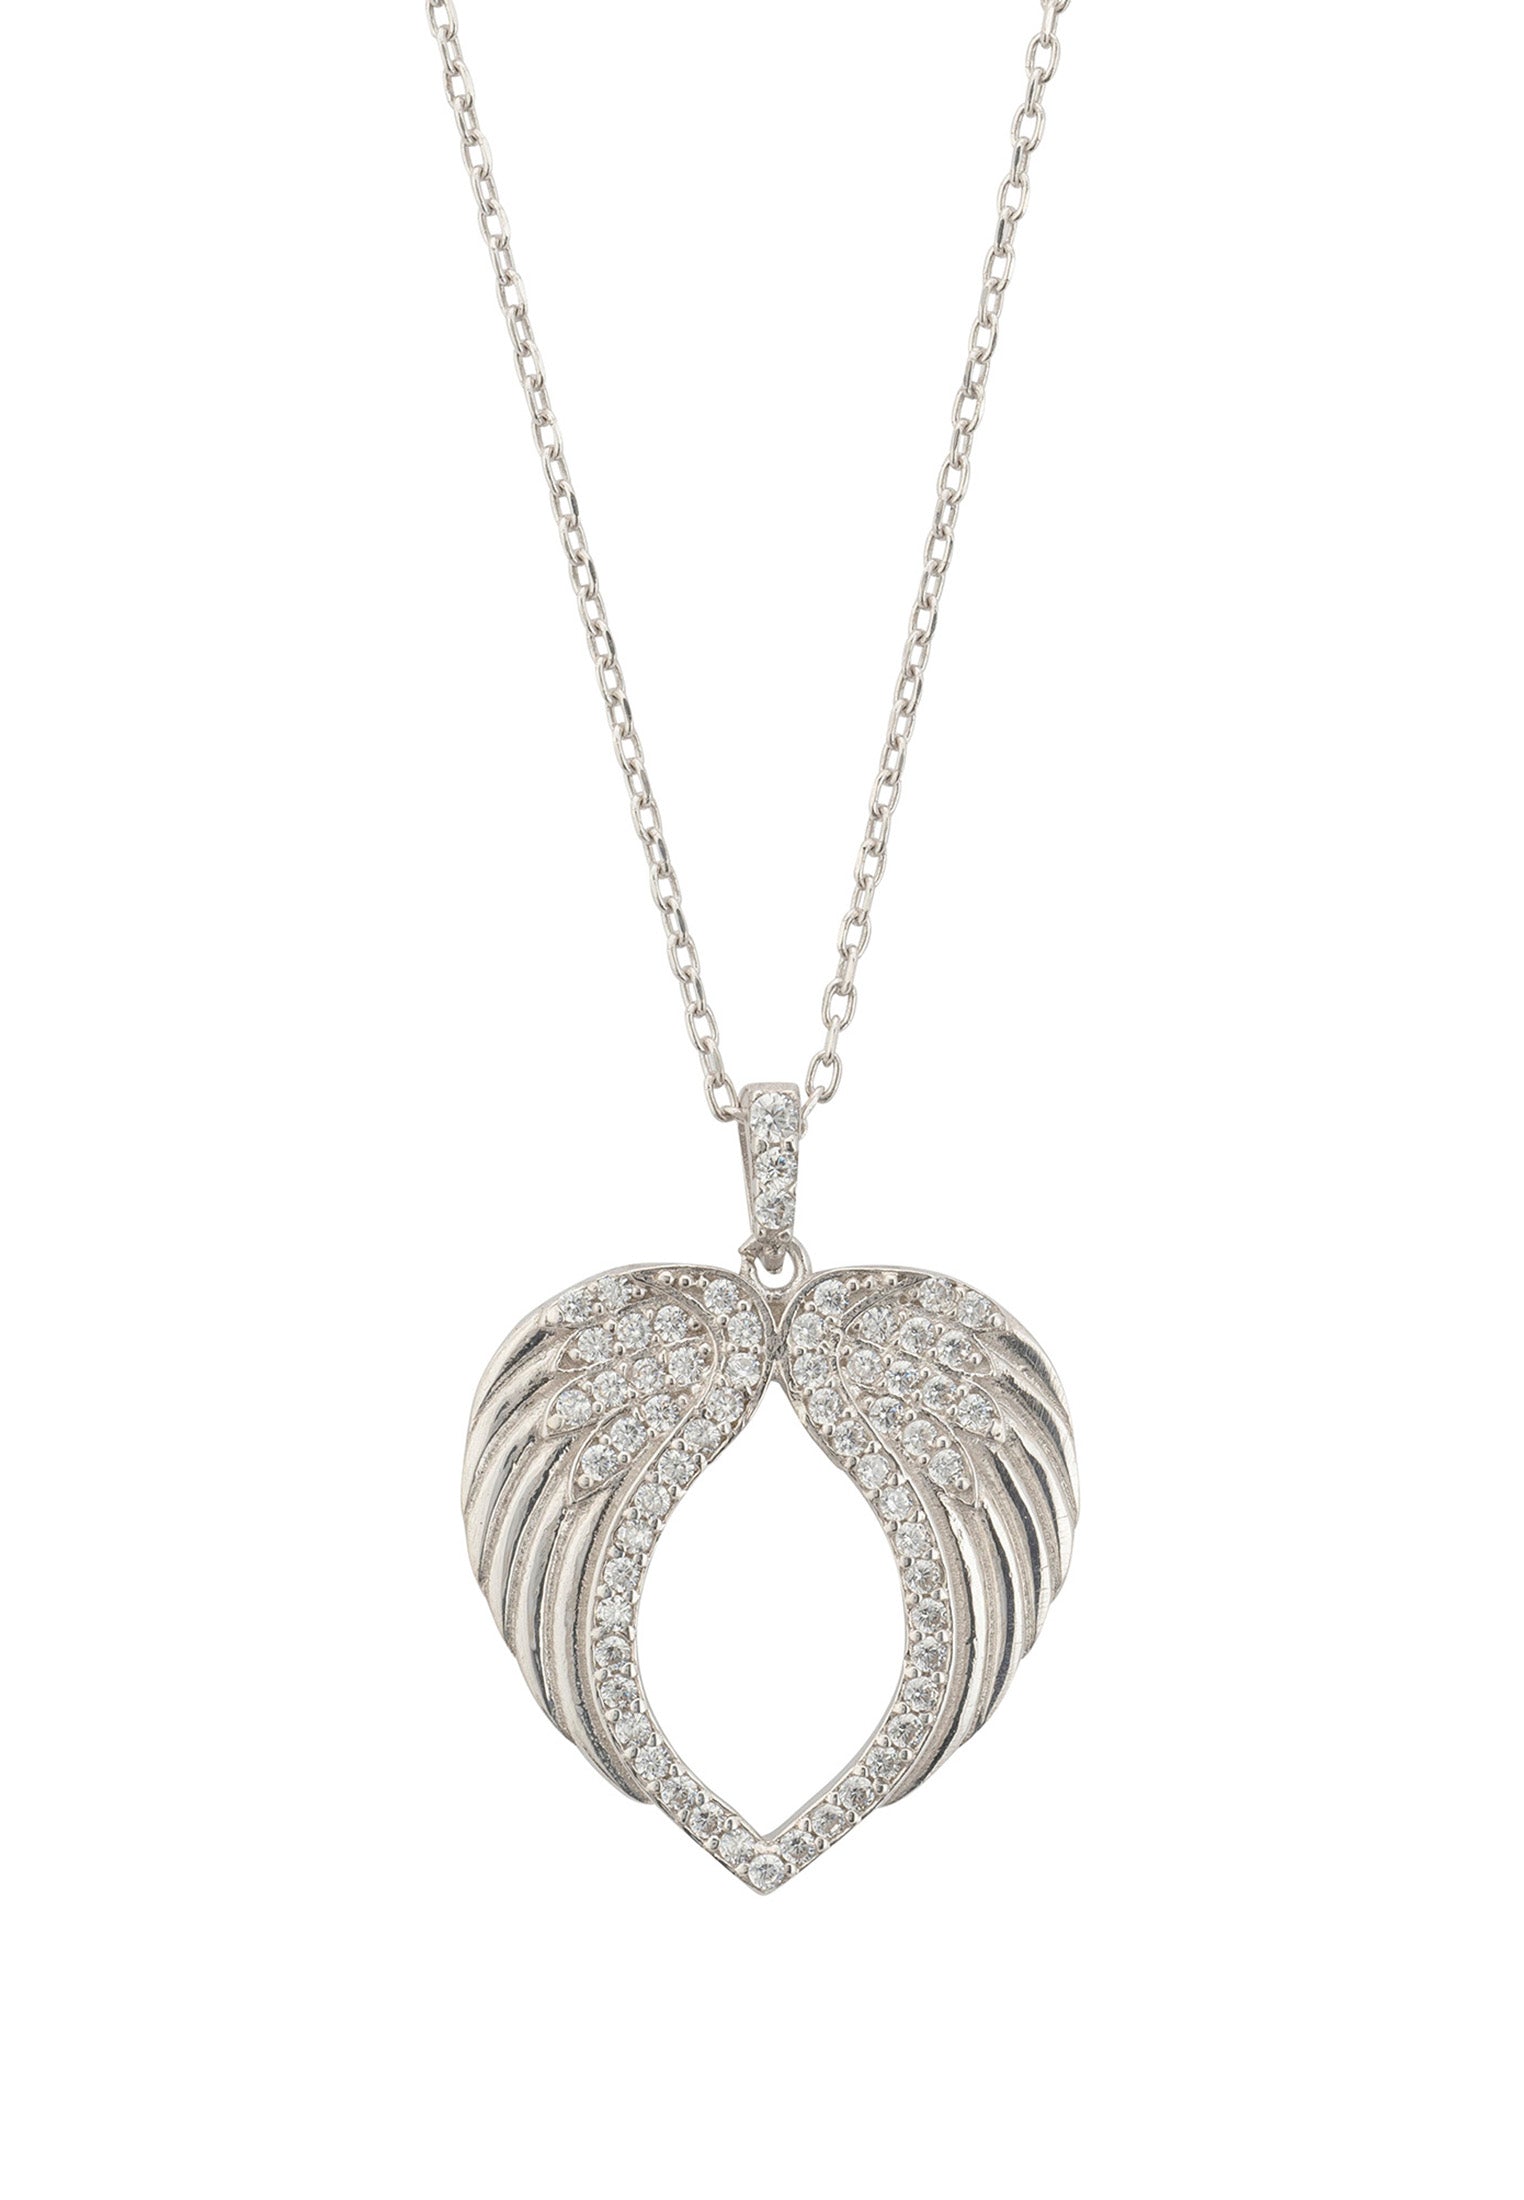 Protective Heart Angel Wing Pendant Necklace Silver